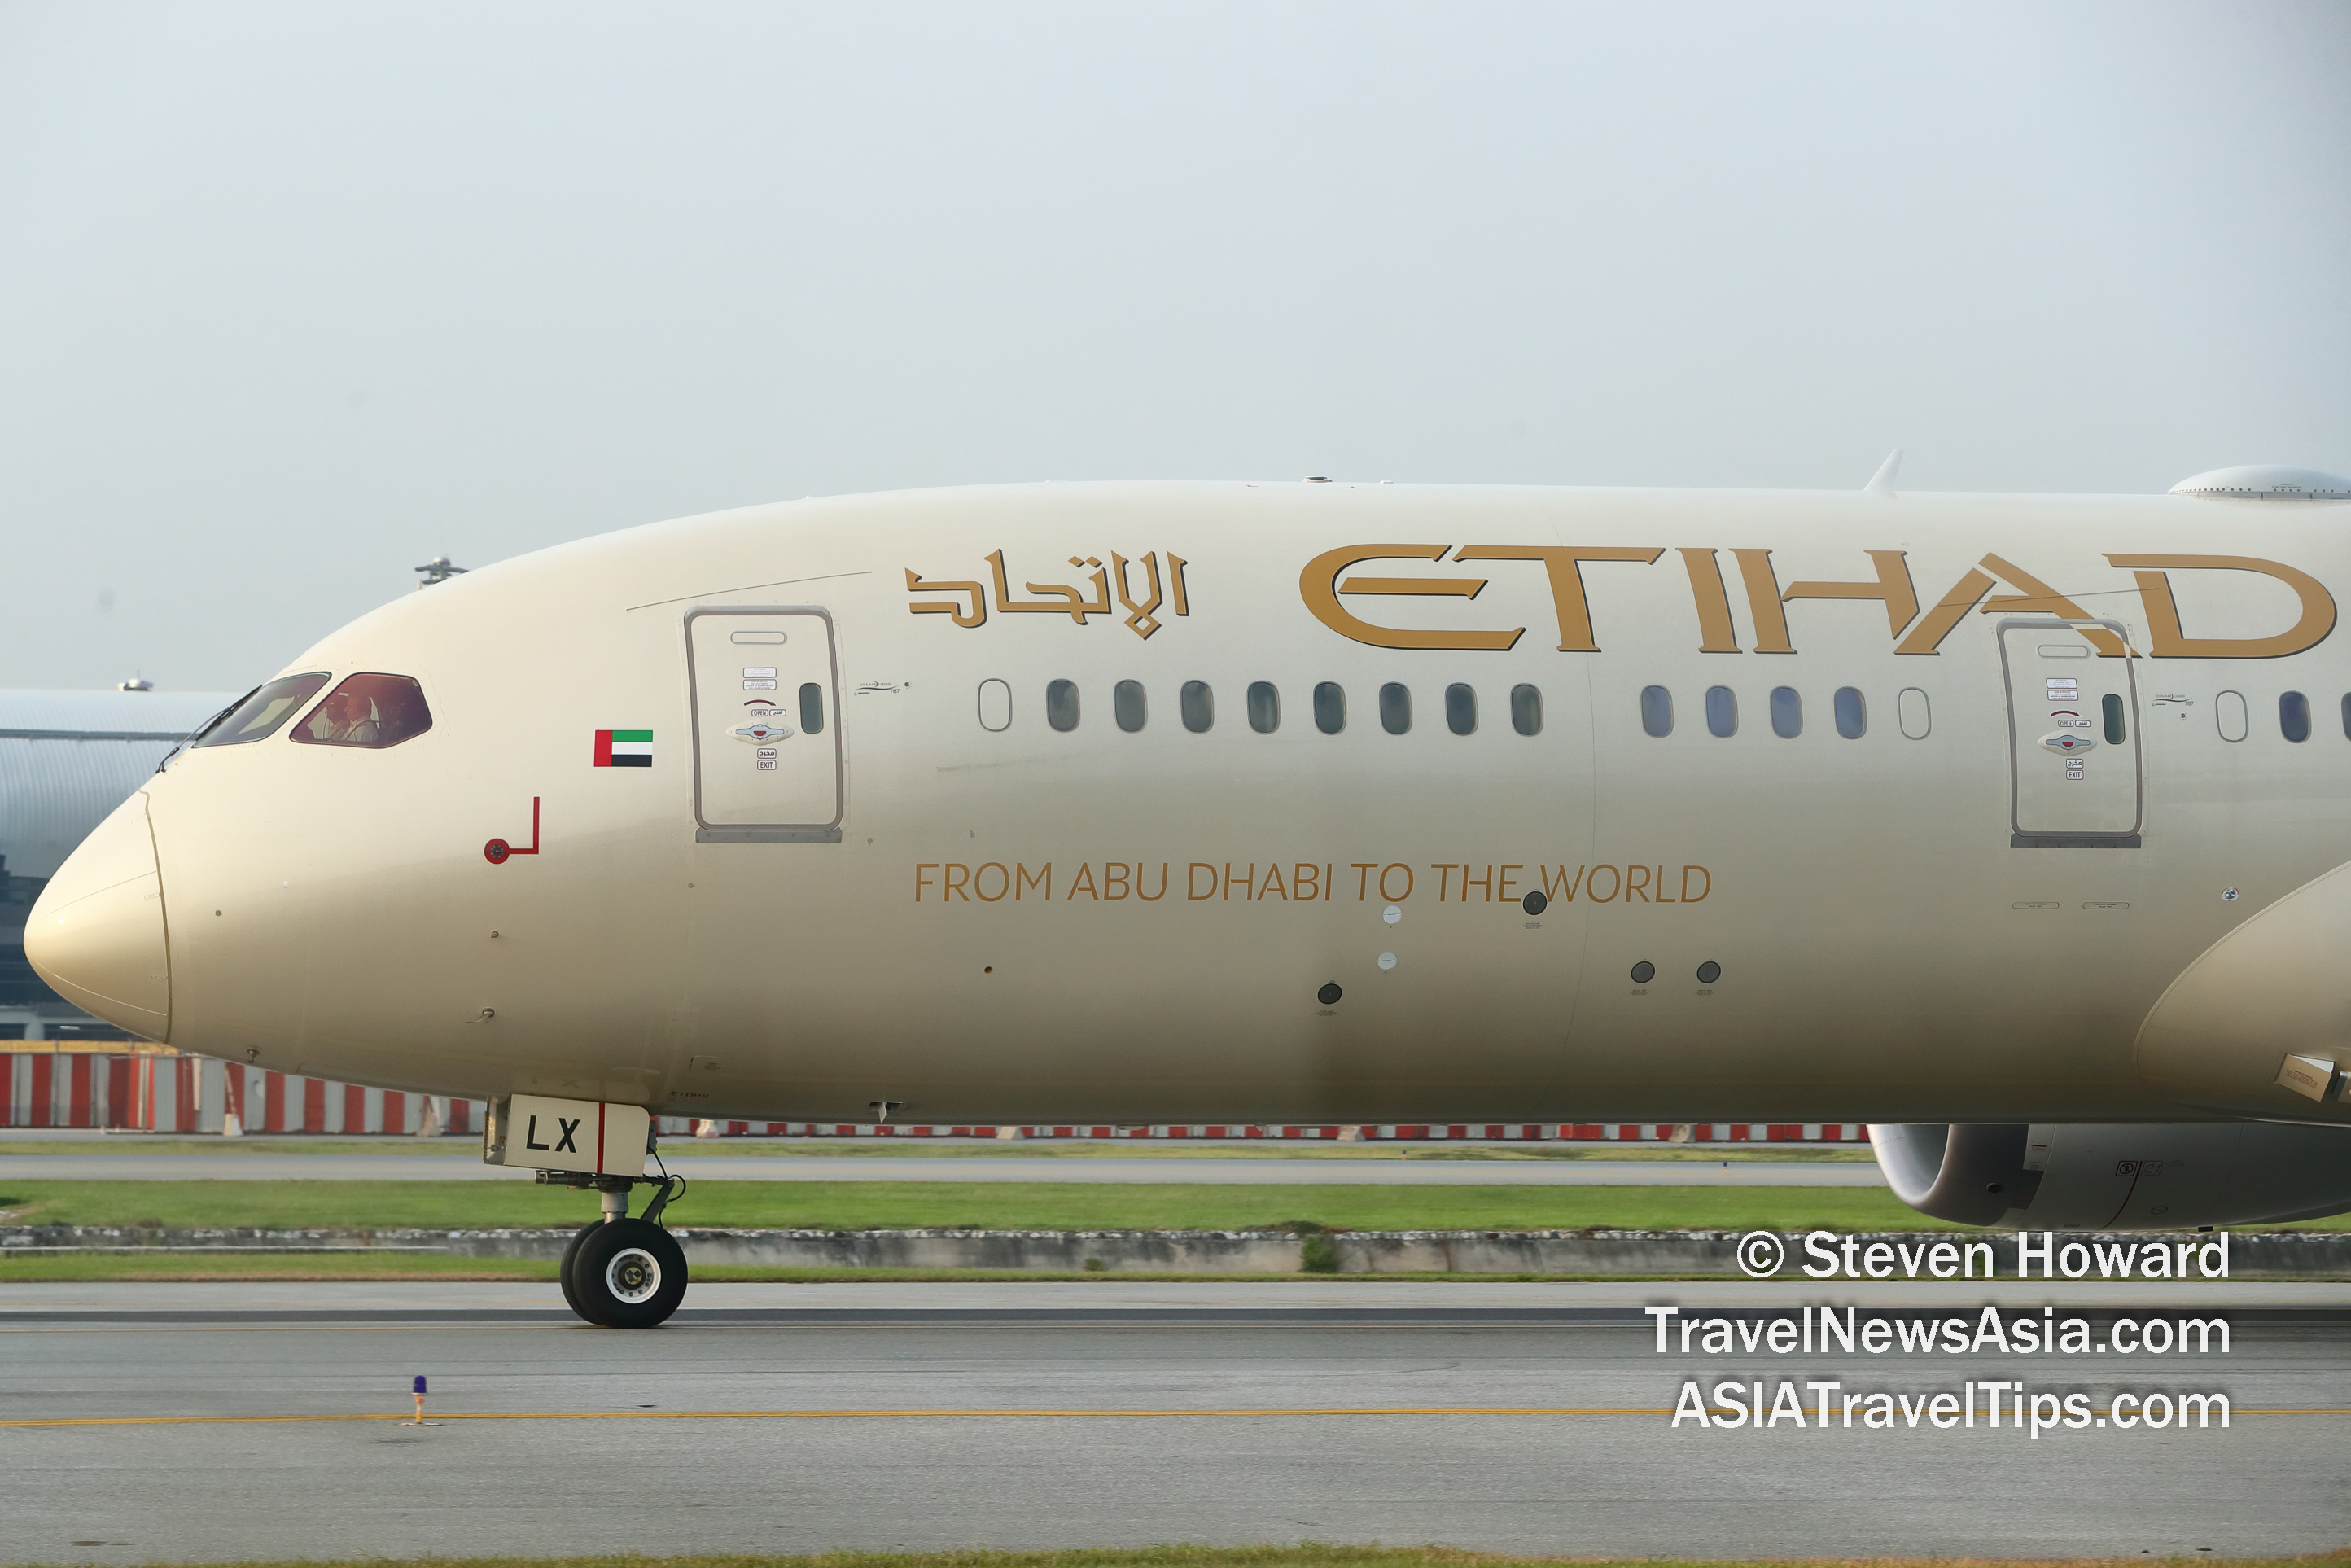 Etihad Airways Boeing 7879 reg: A6-BLX. Picture by Steven Howard of TravelNewsAsia.com Click to enlarge.